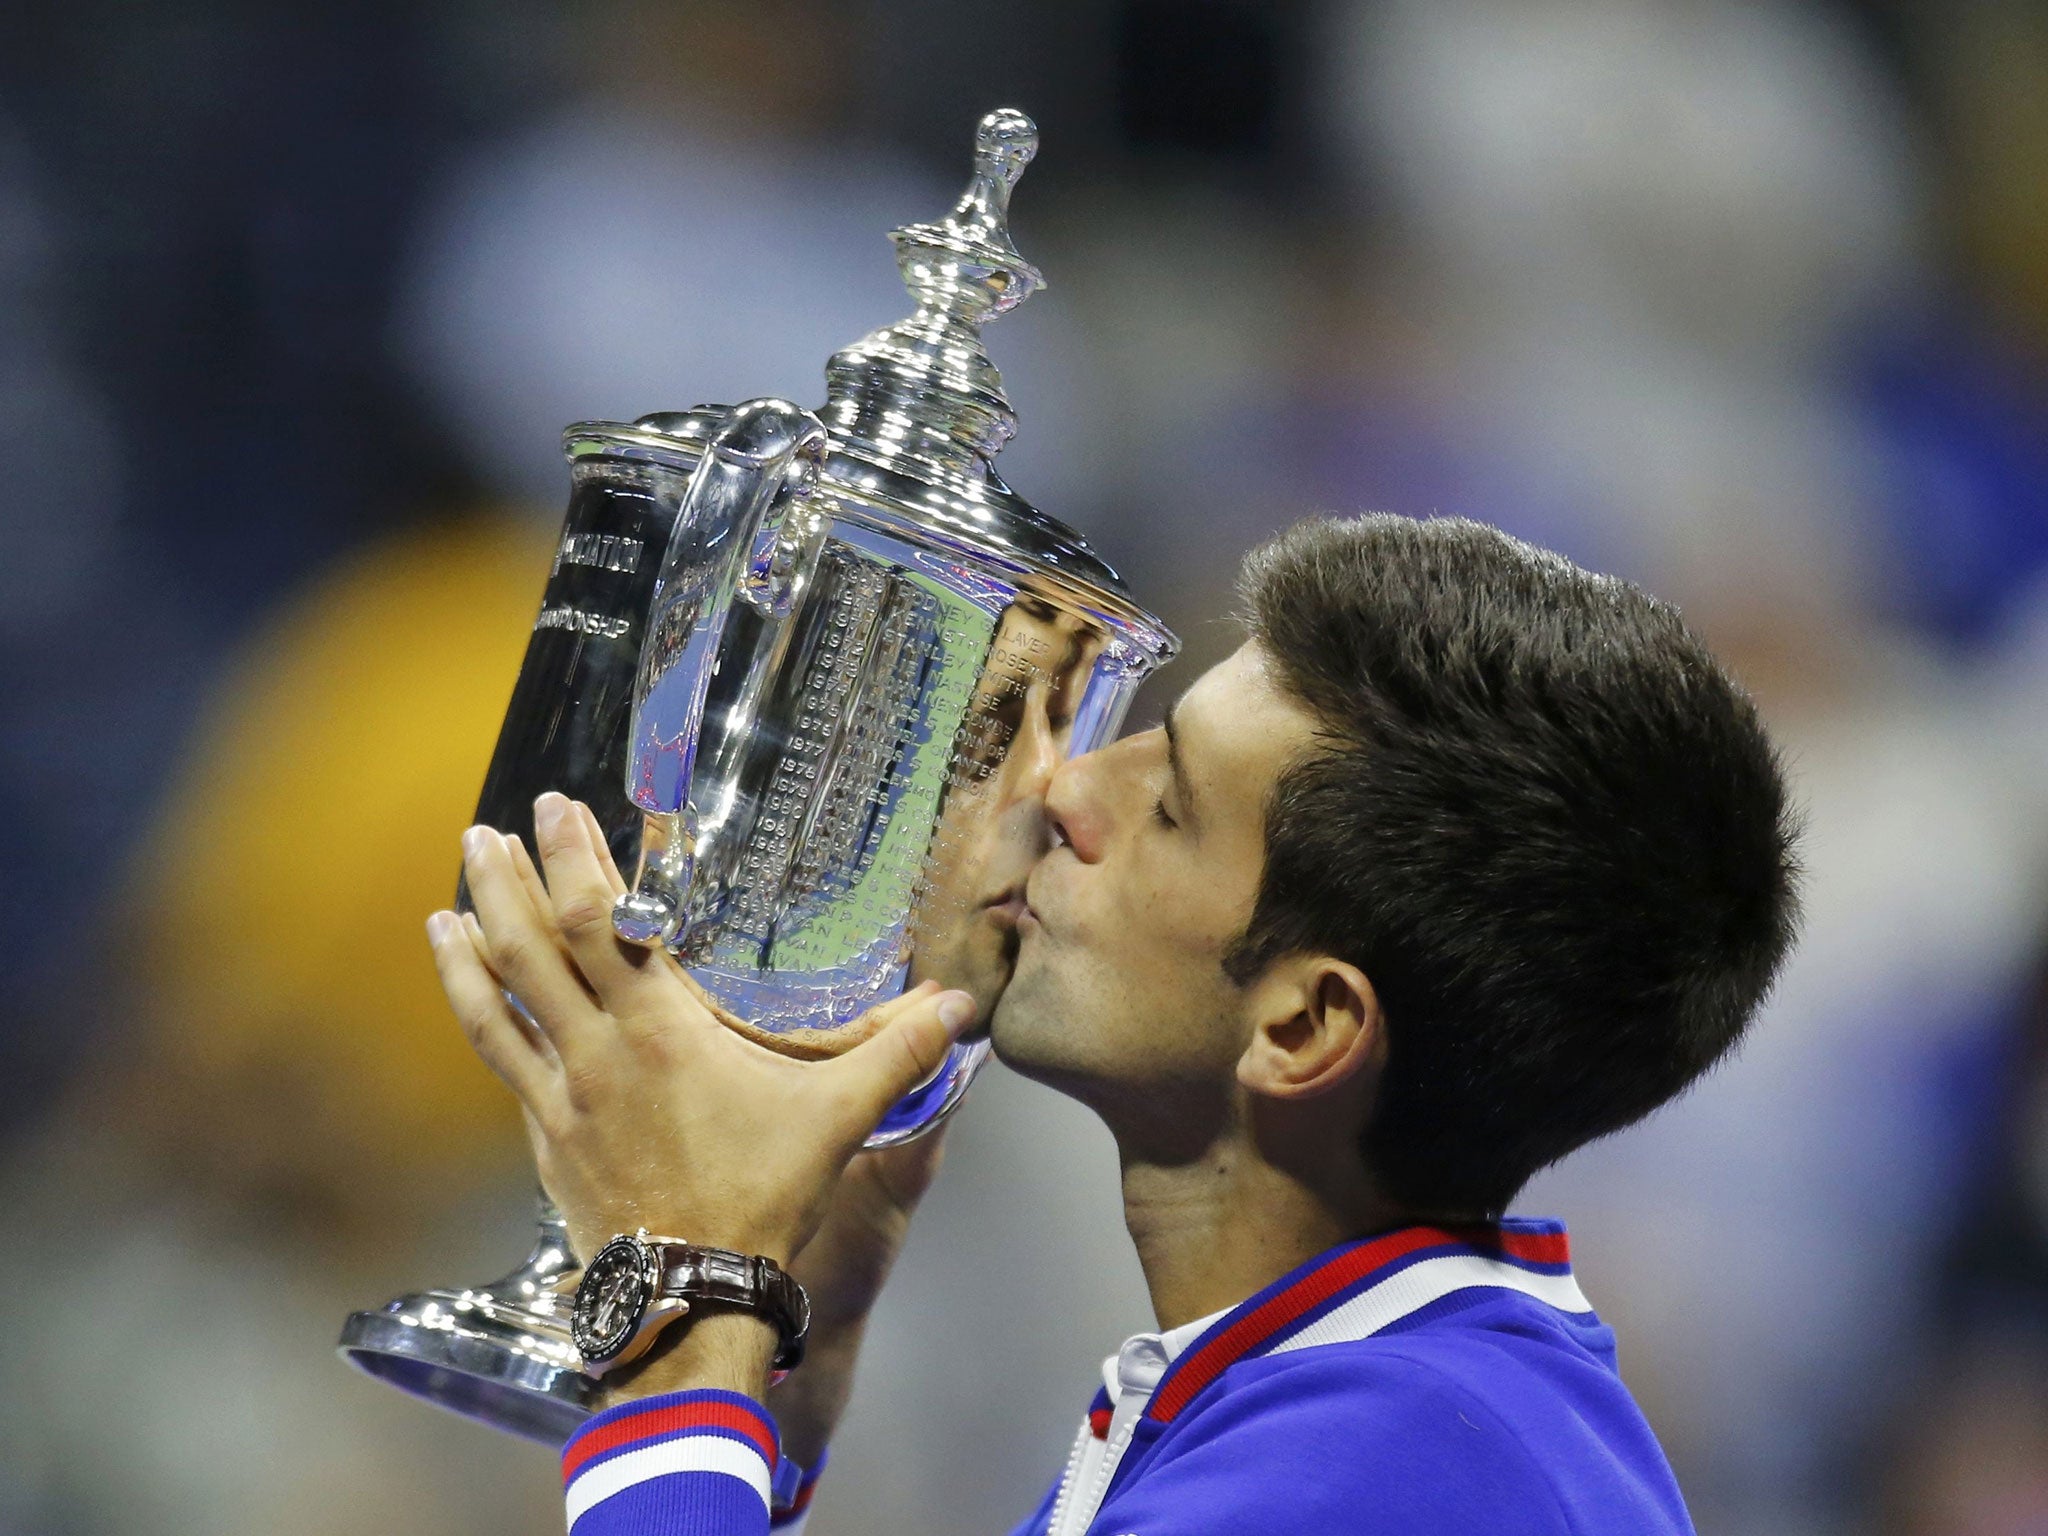 Novak Djokovic kisses the US Open trophy after defeating Roger Federer in their men's singles final match in New York